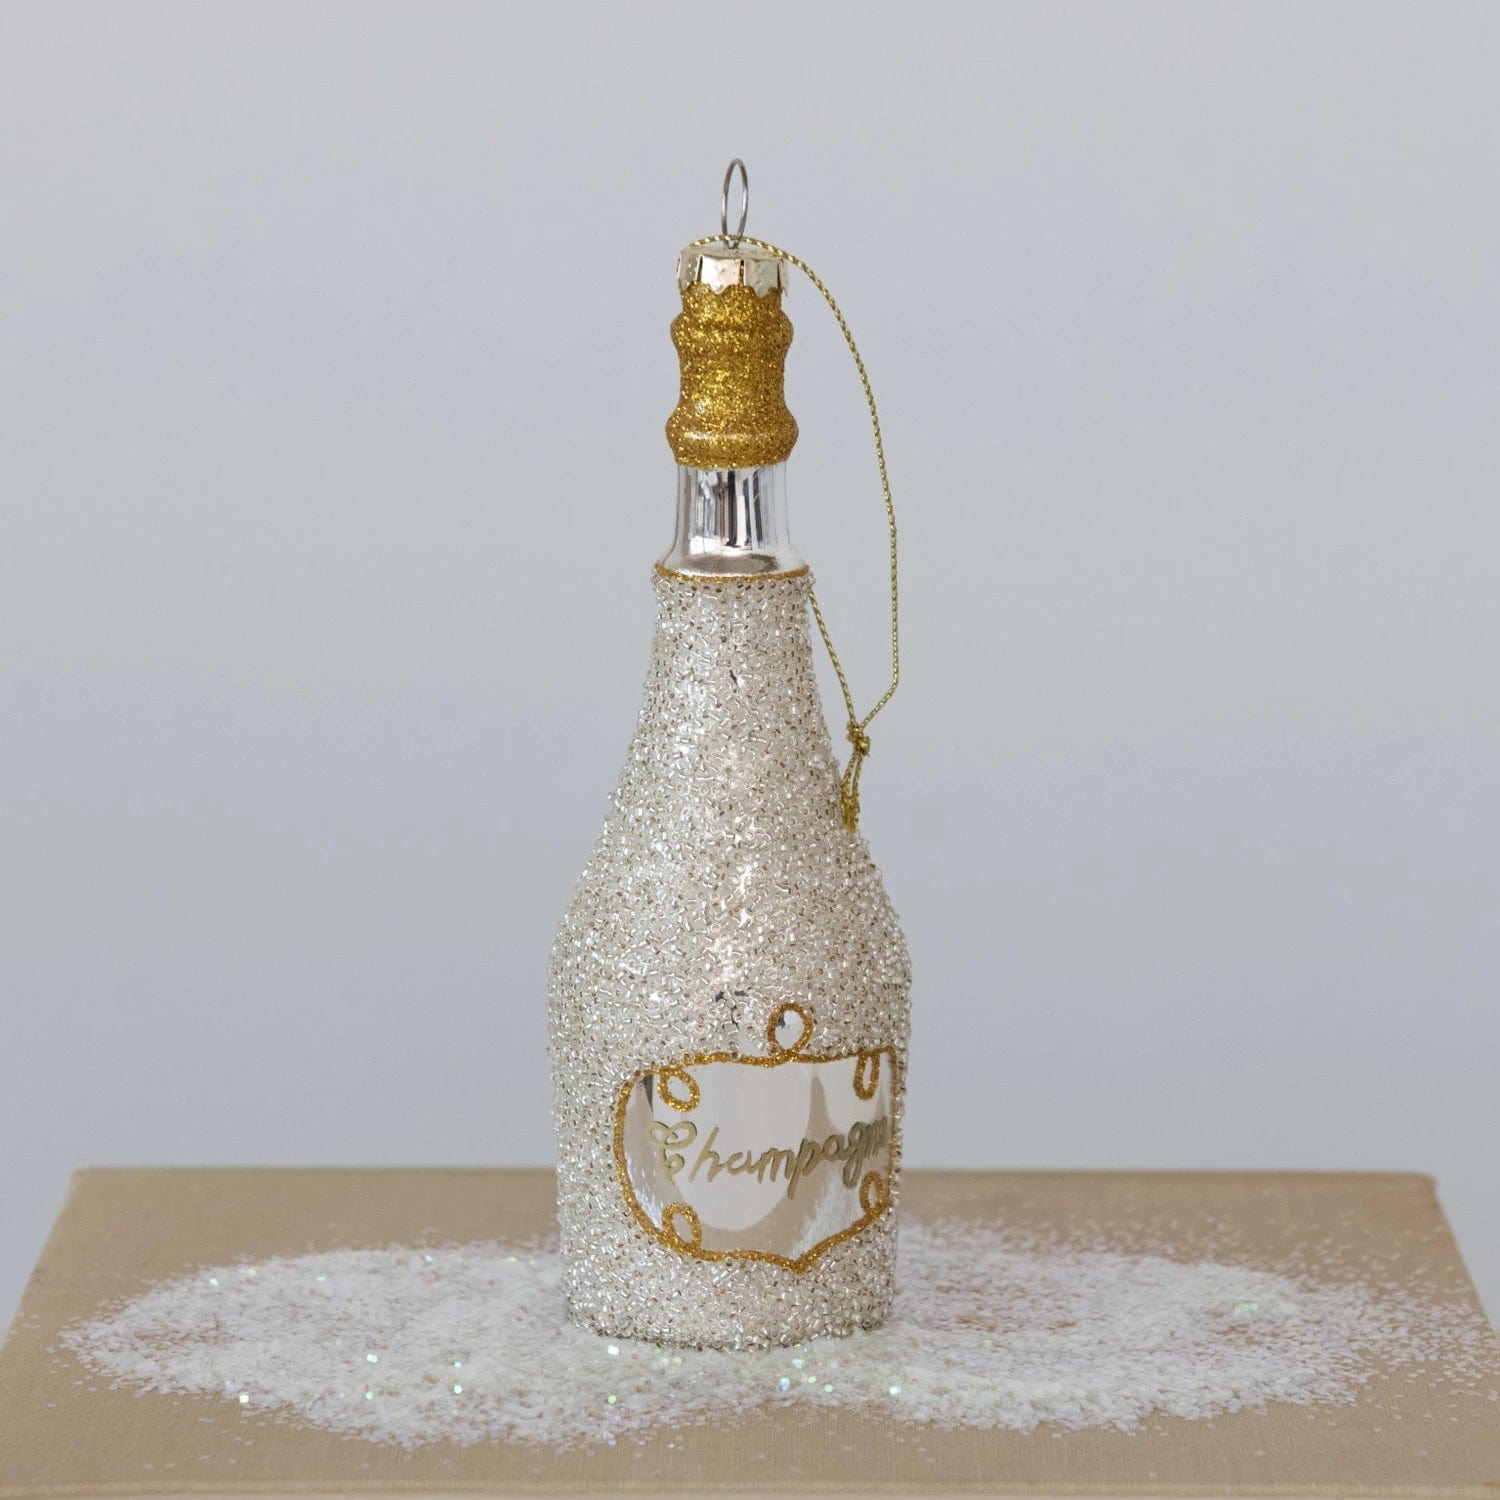 Creative Co-Op Creative Co-op Glass Champagne Bottle Ornament with Glitter - Little Miss Muffin Children & Home